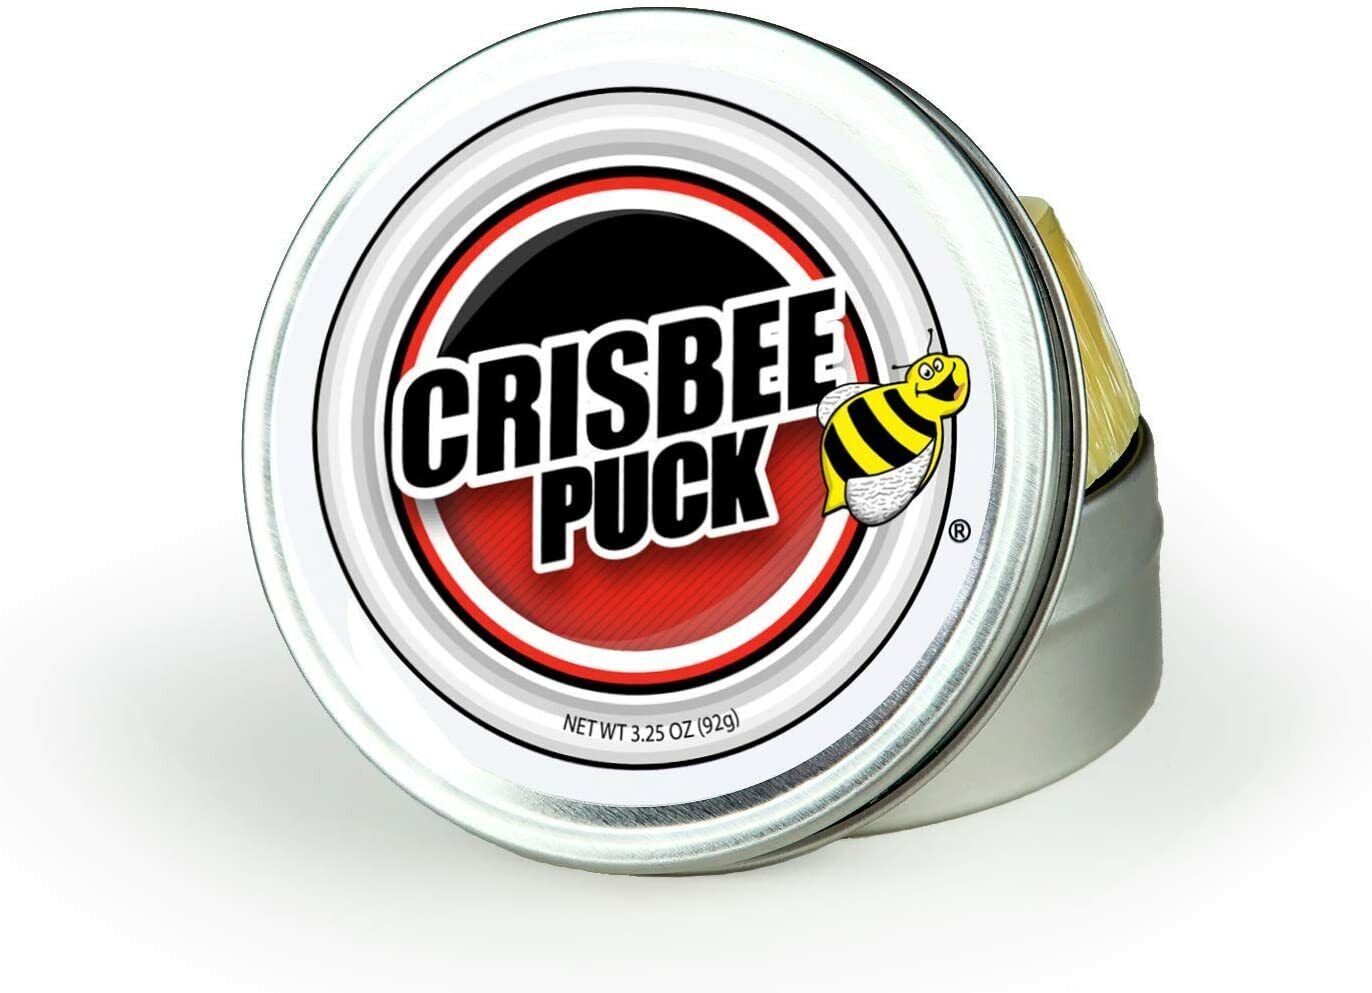 CRISBEE PUCK - CAST IRON SEASONING - MAINTAIN A CLEANER, NON-STICK SKILLET